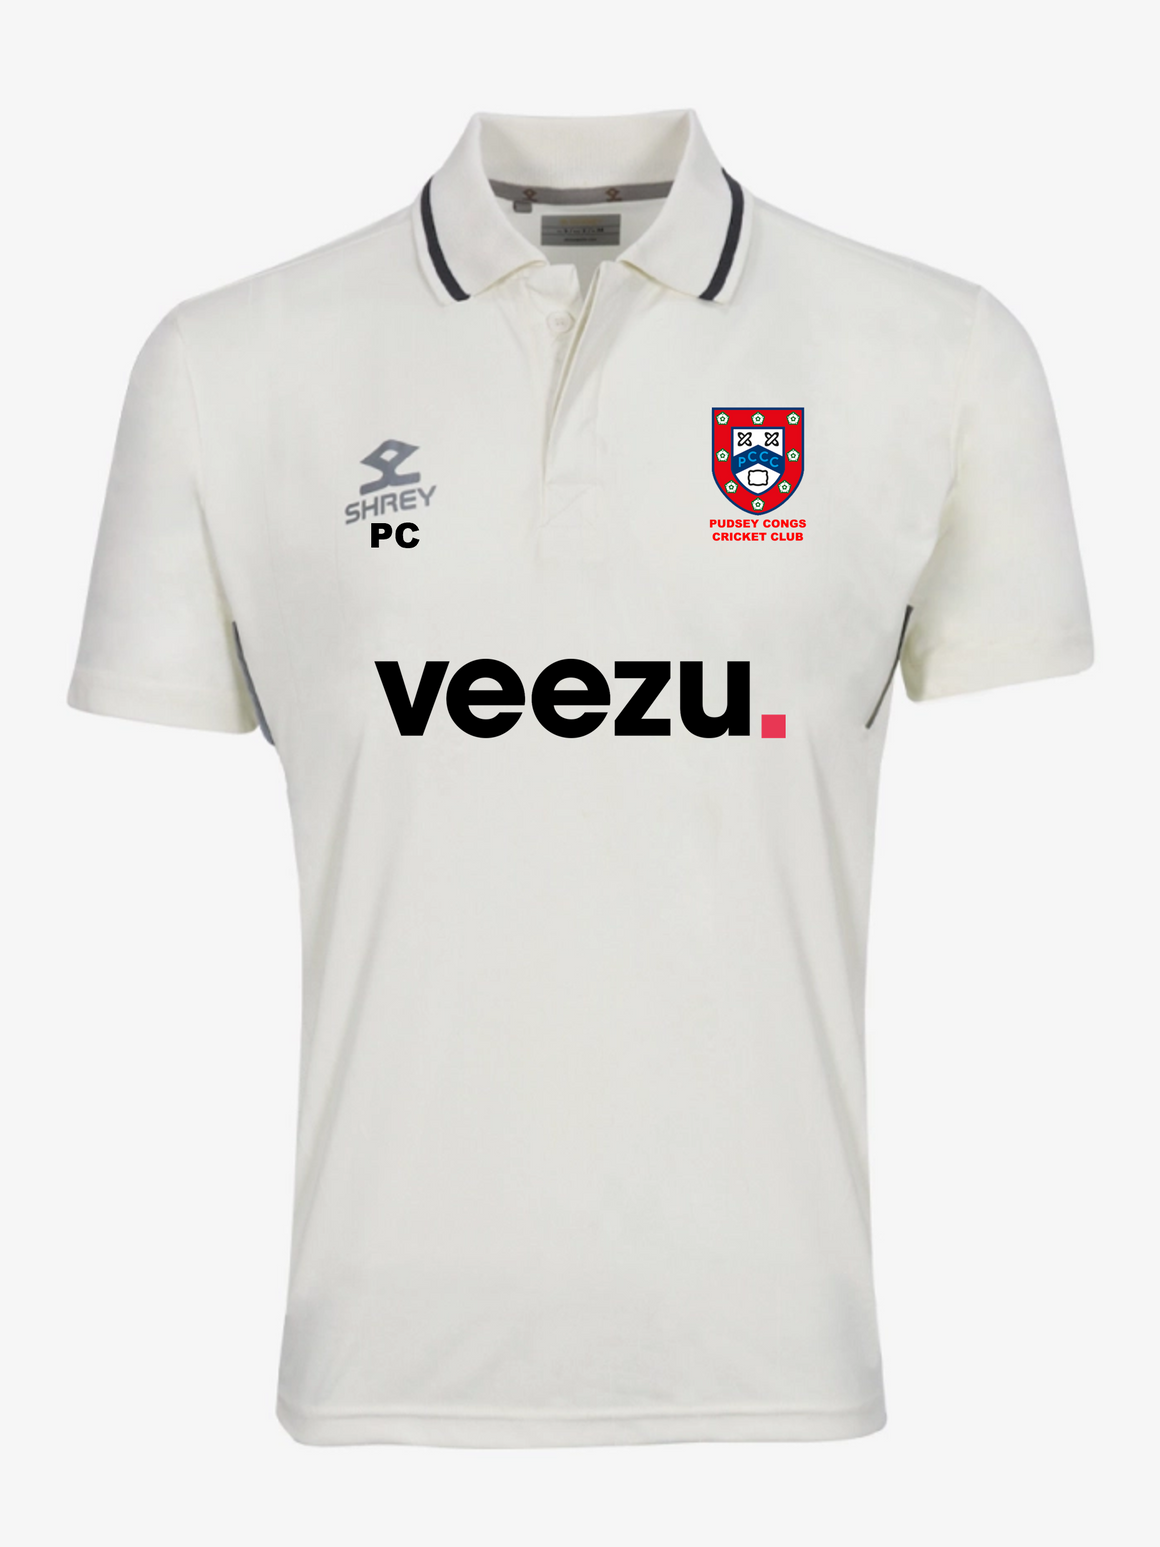 Pudsey Congs Elite S/S Playing Shirt